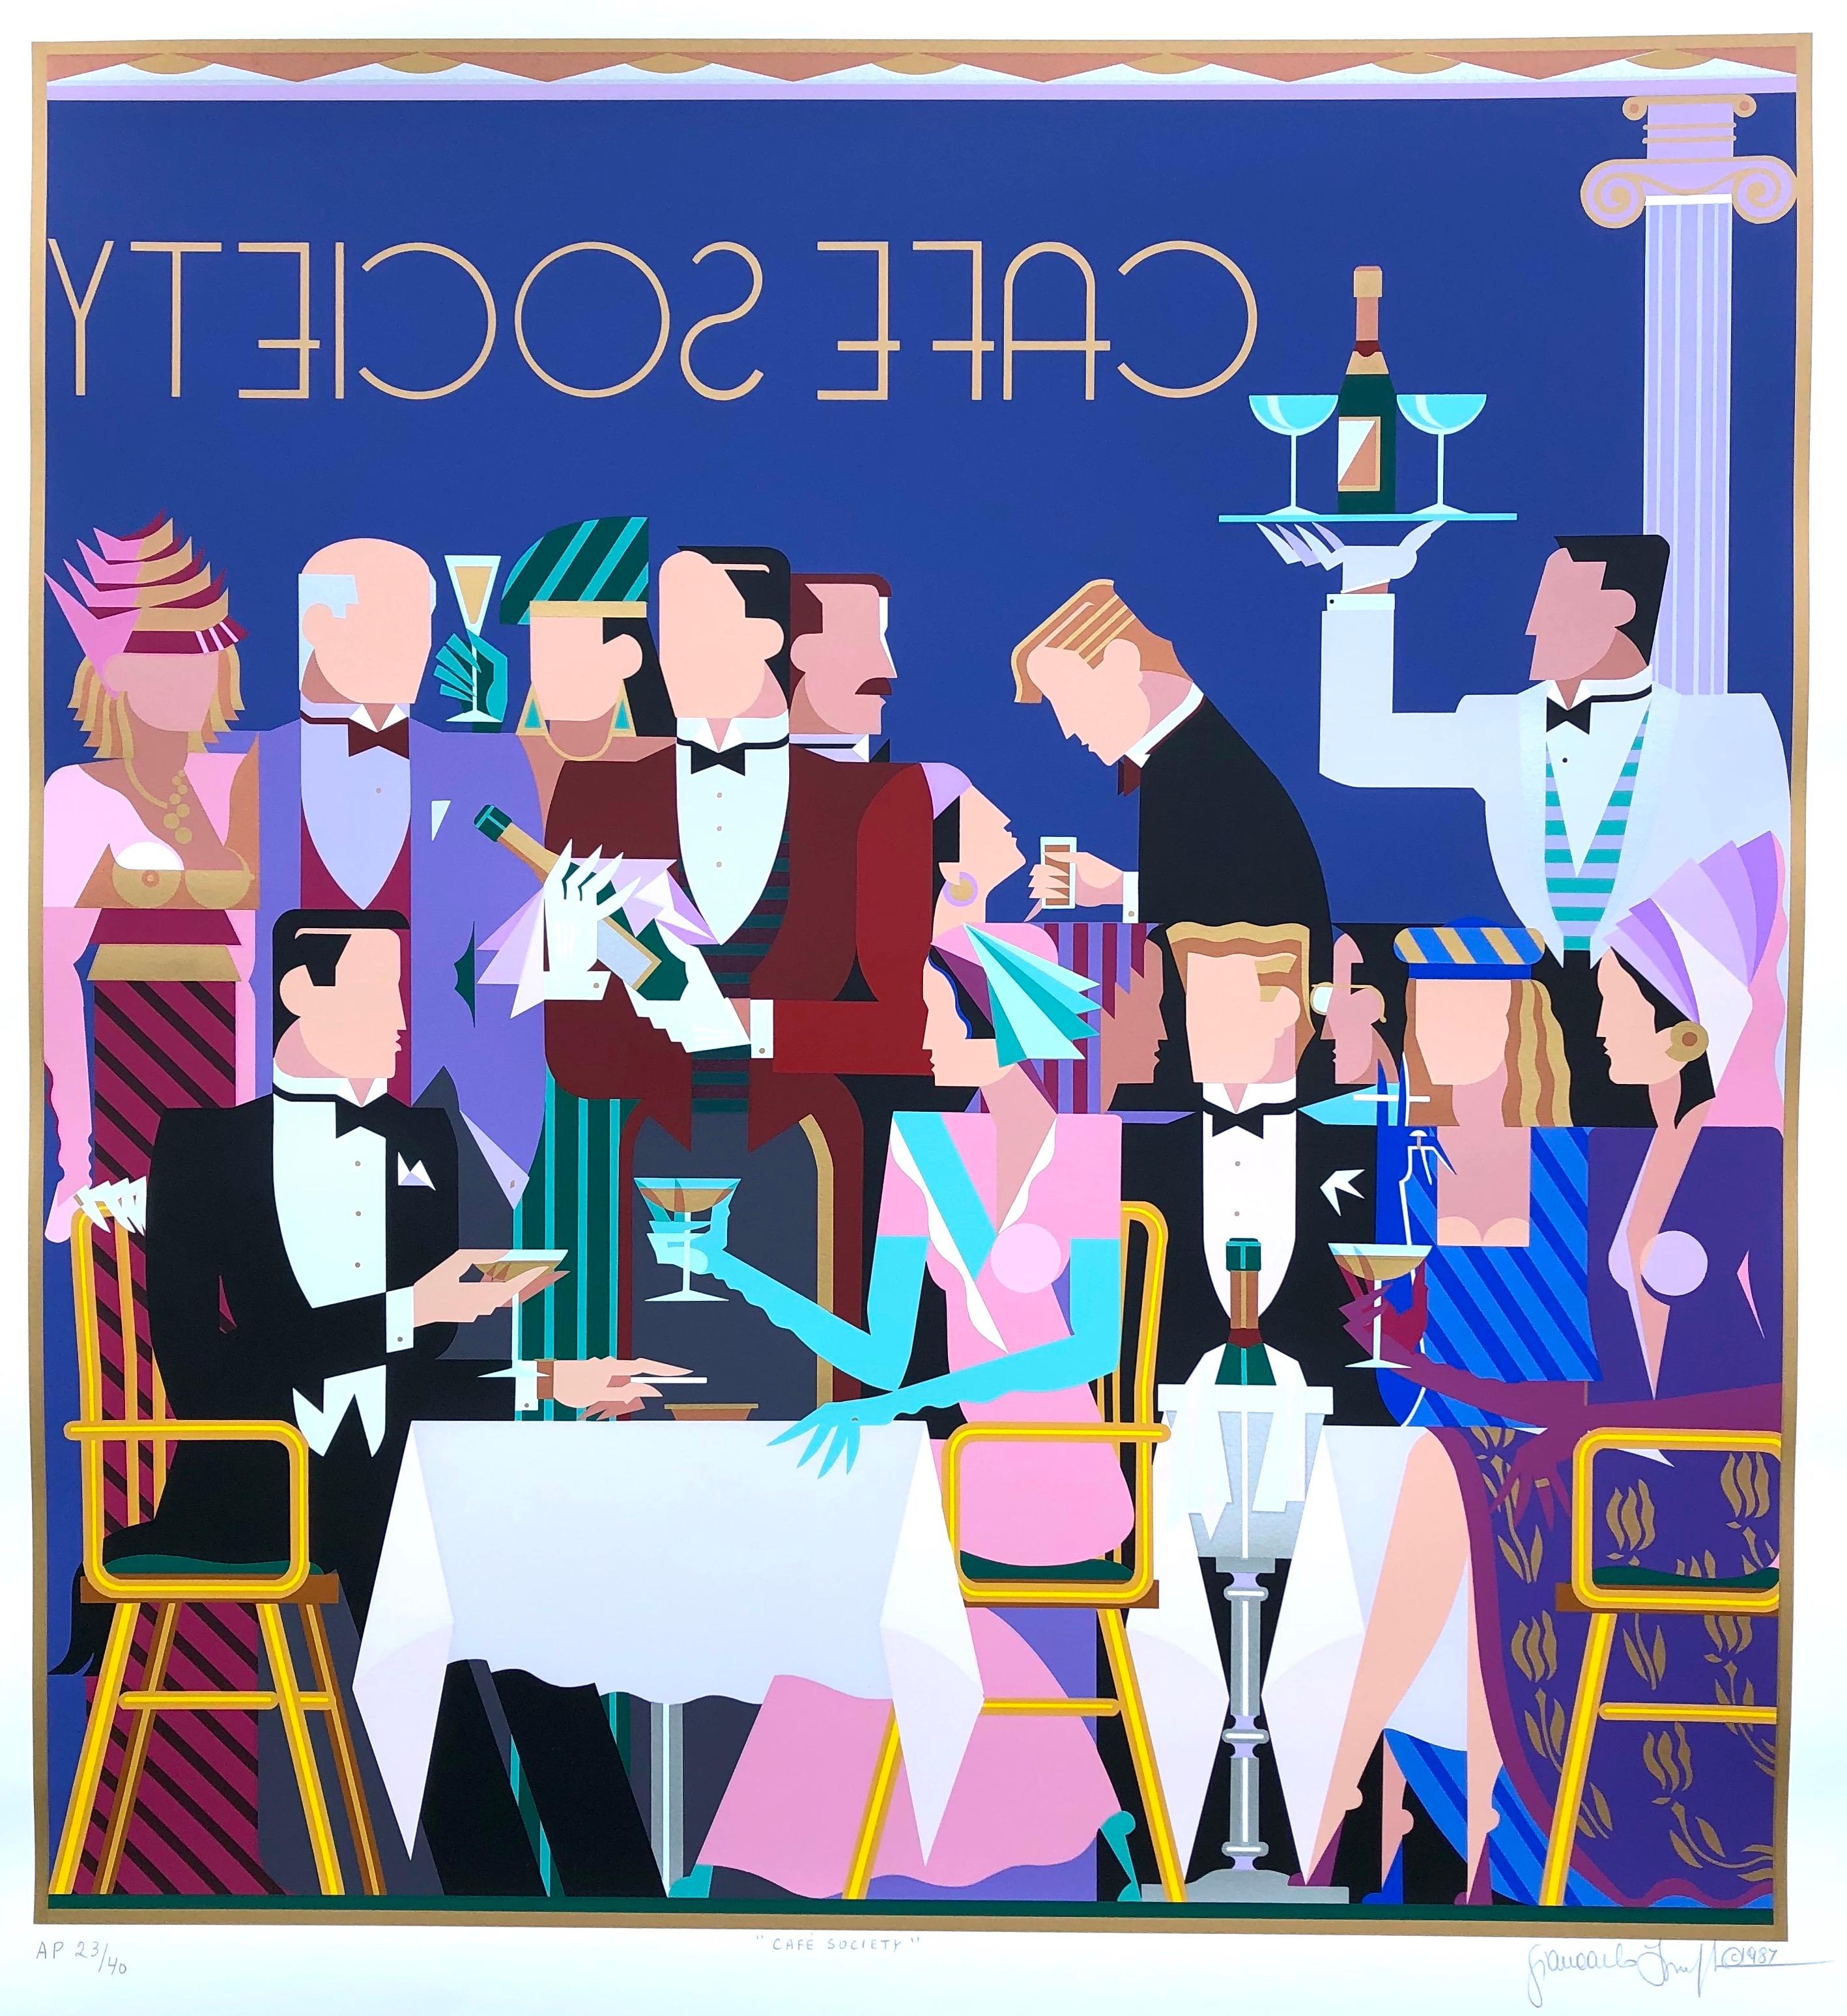 Giancarlo Impiglia Figurative Print - Famous rare serigraph "Cafe Society" from the Cafe Society series